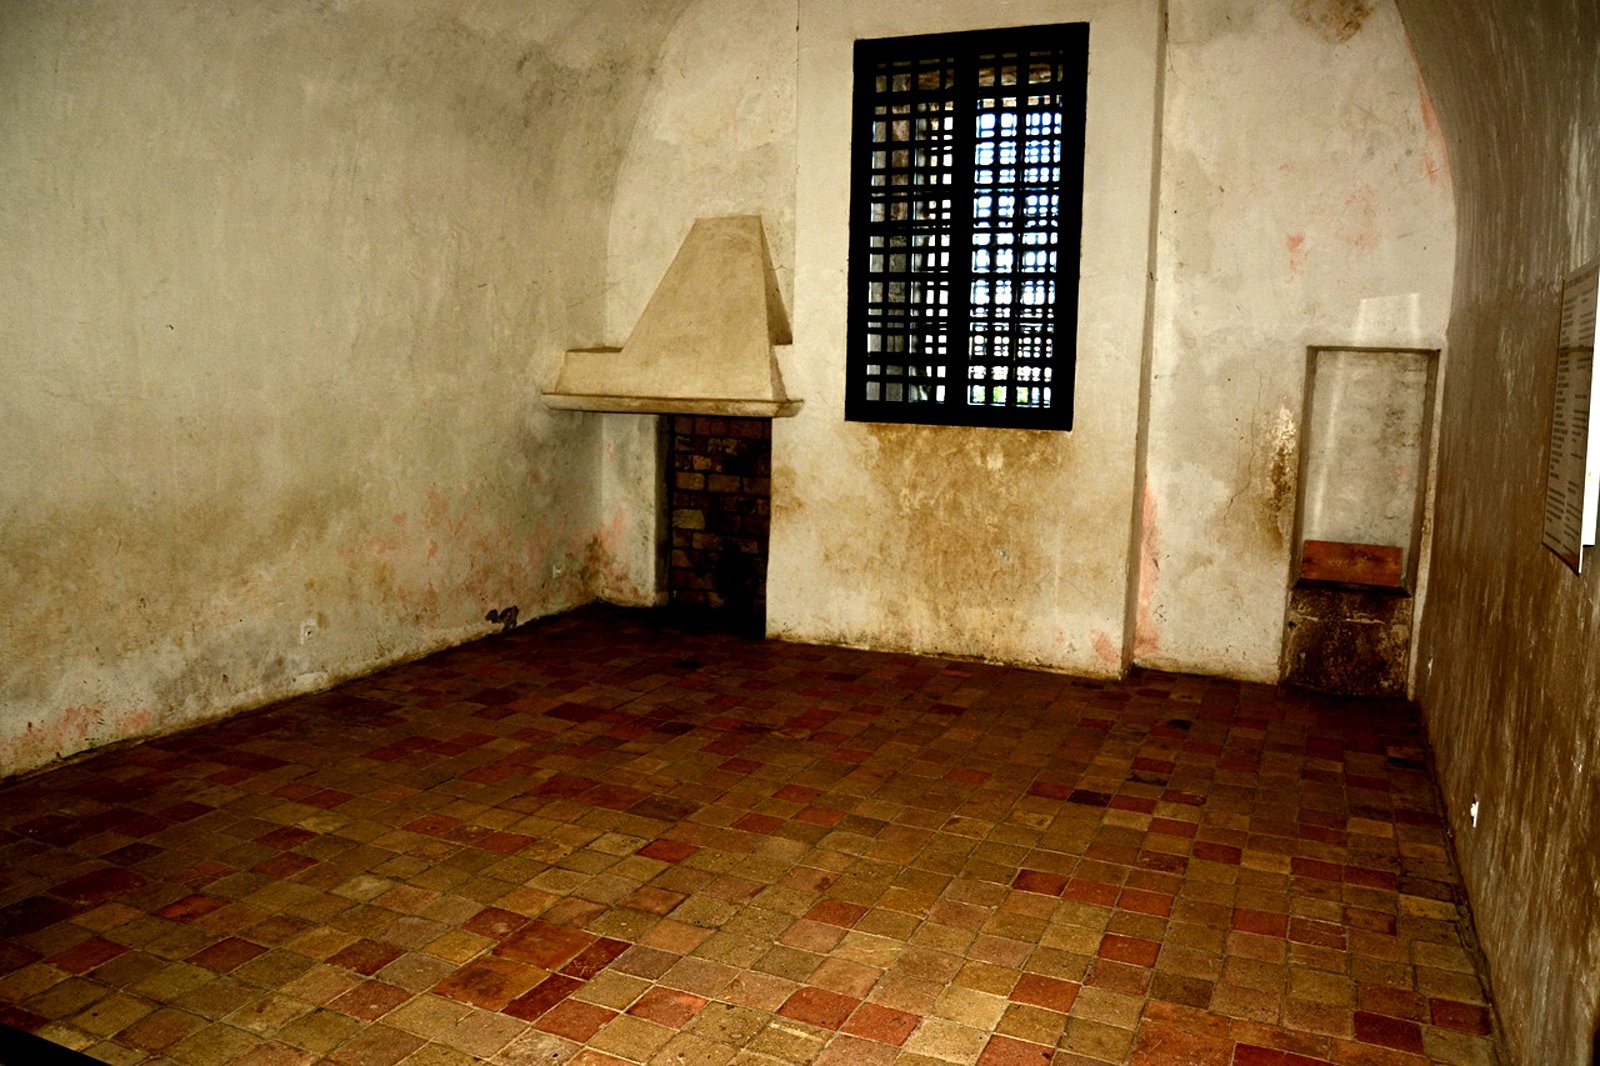 How to visit the Iron Mask prison cell in Cannes